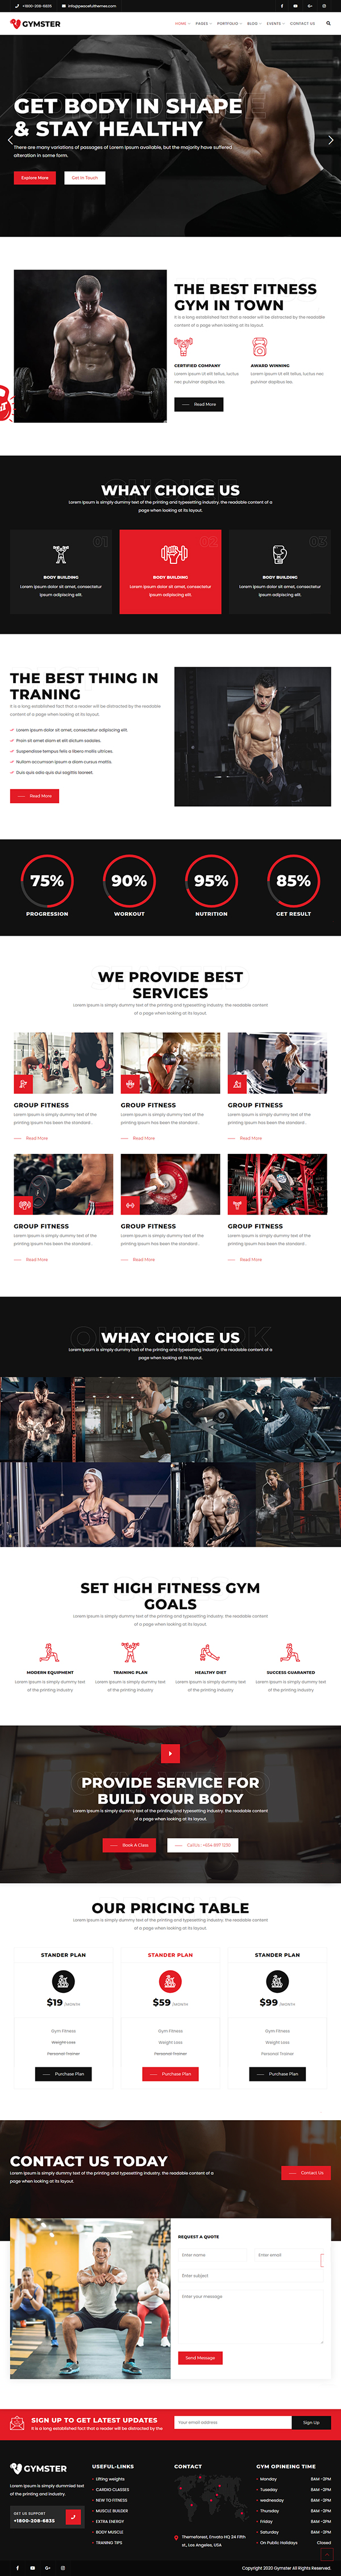 Gymster – Fitness and Gym WordPress Theme